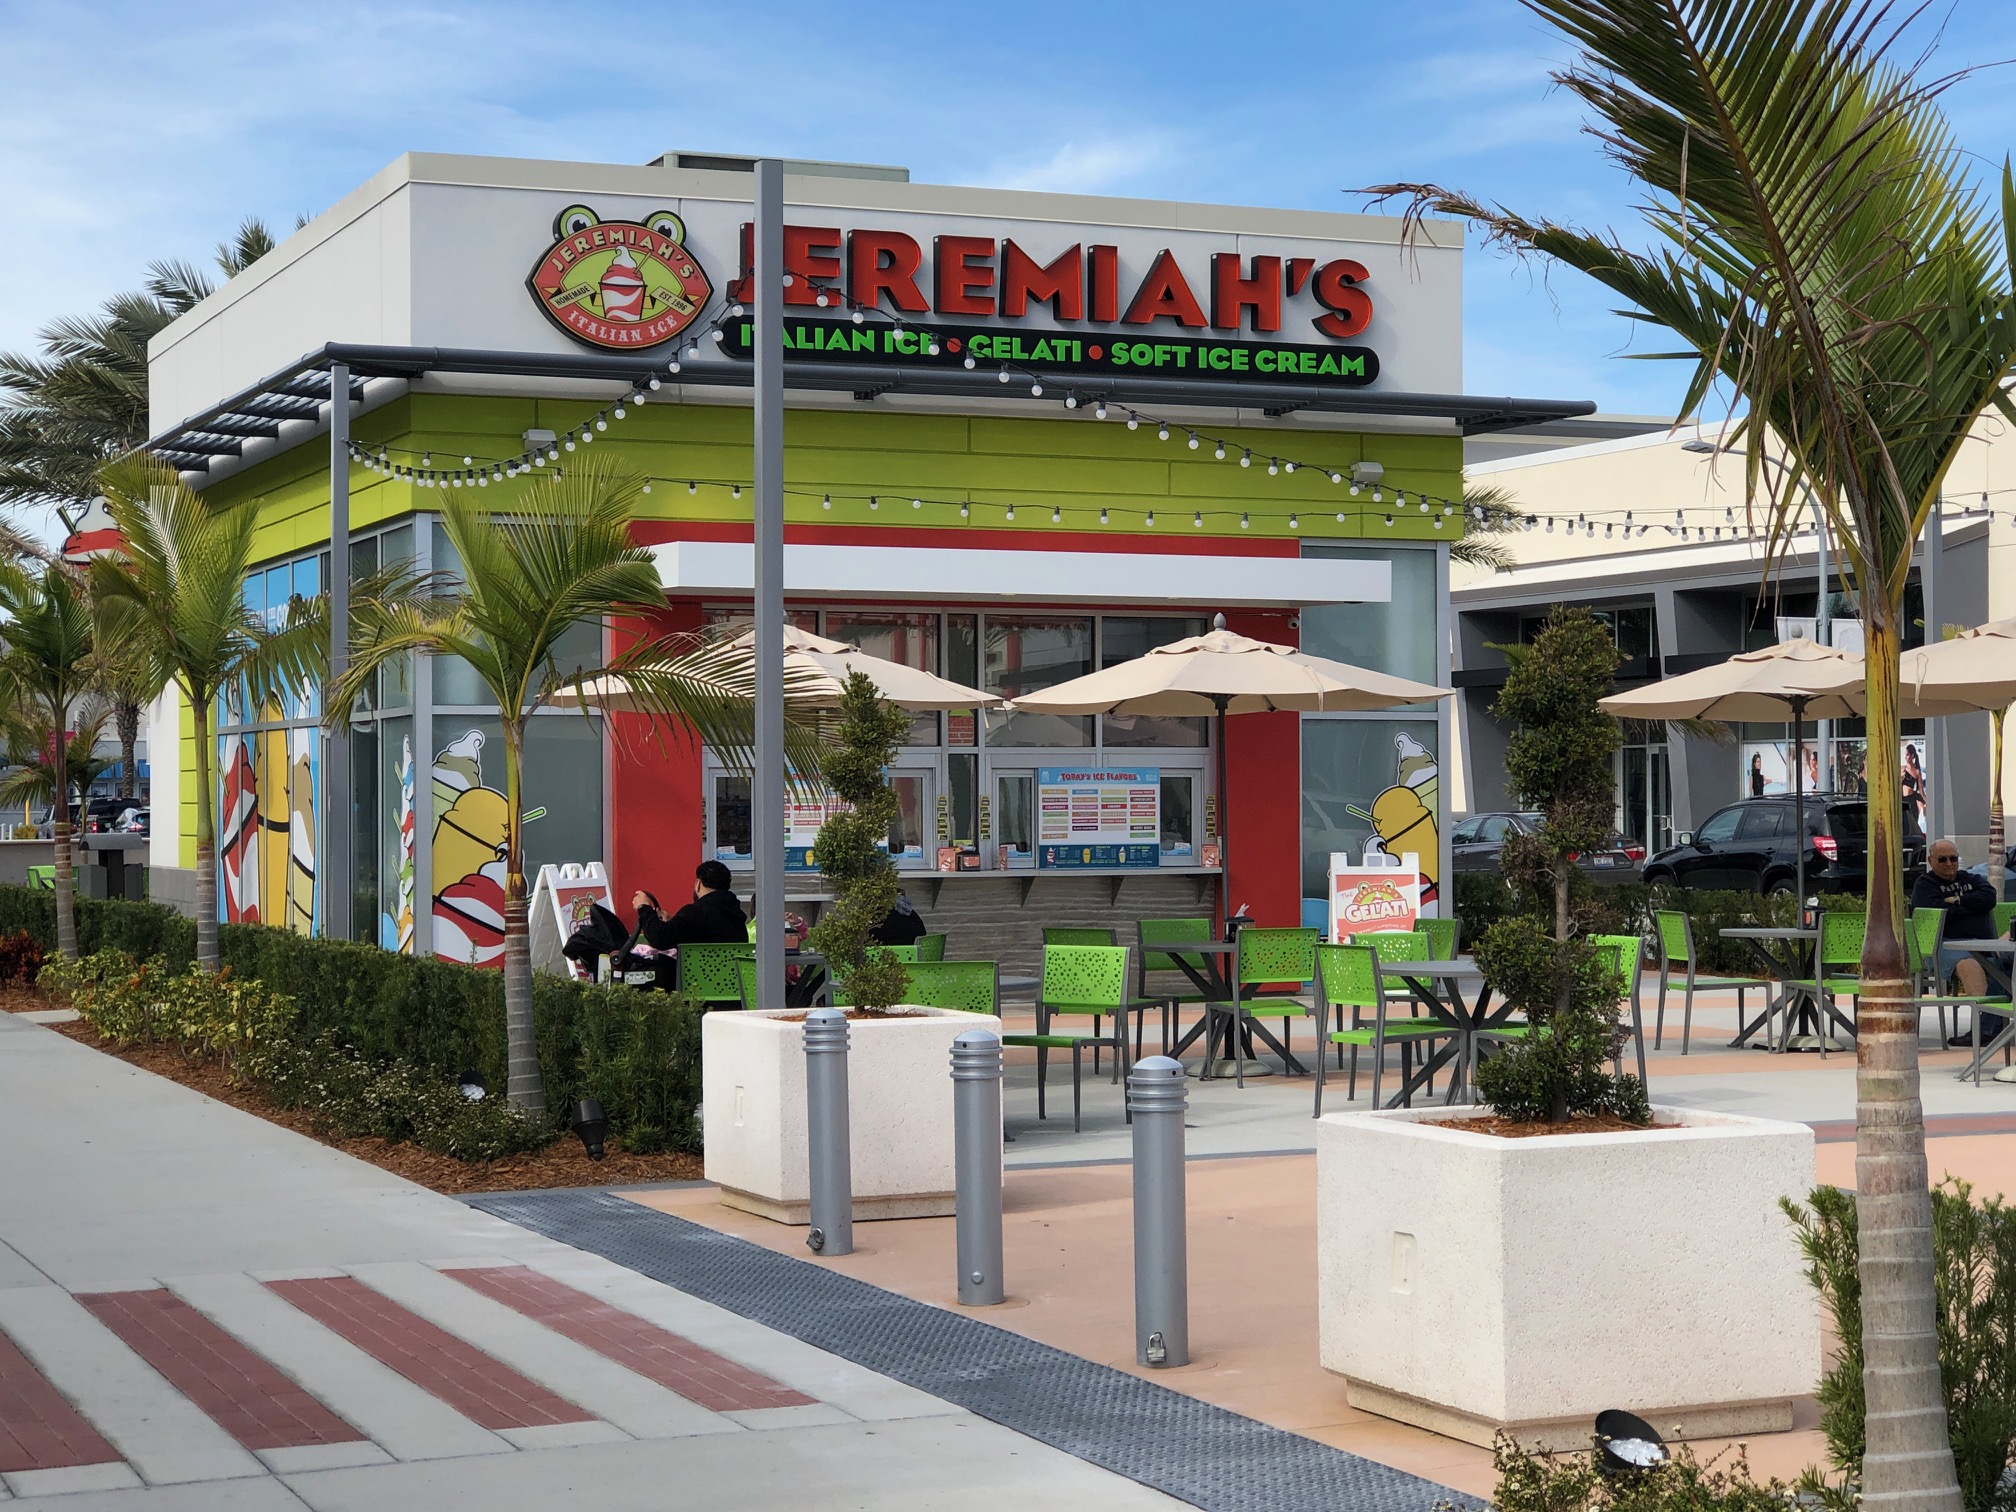 Exterior of Jeremiah’s Italian Ice business in Florida with palm trees and string lights.